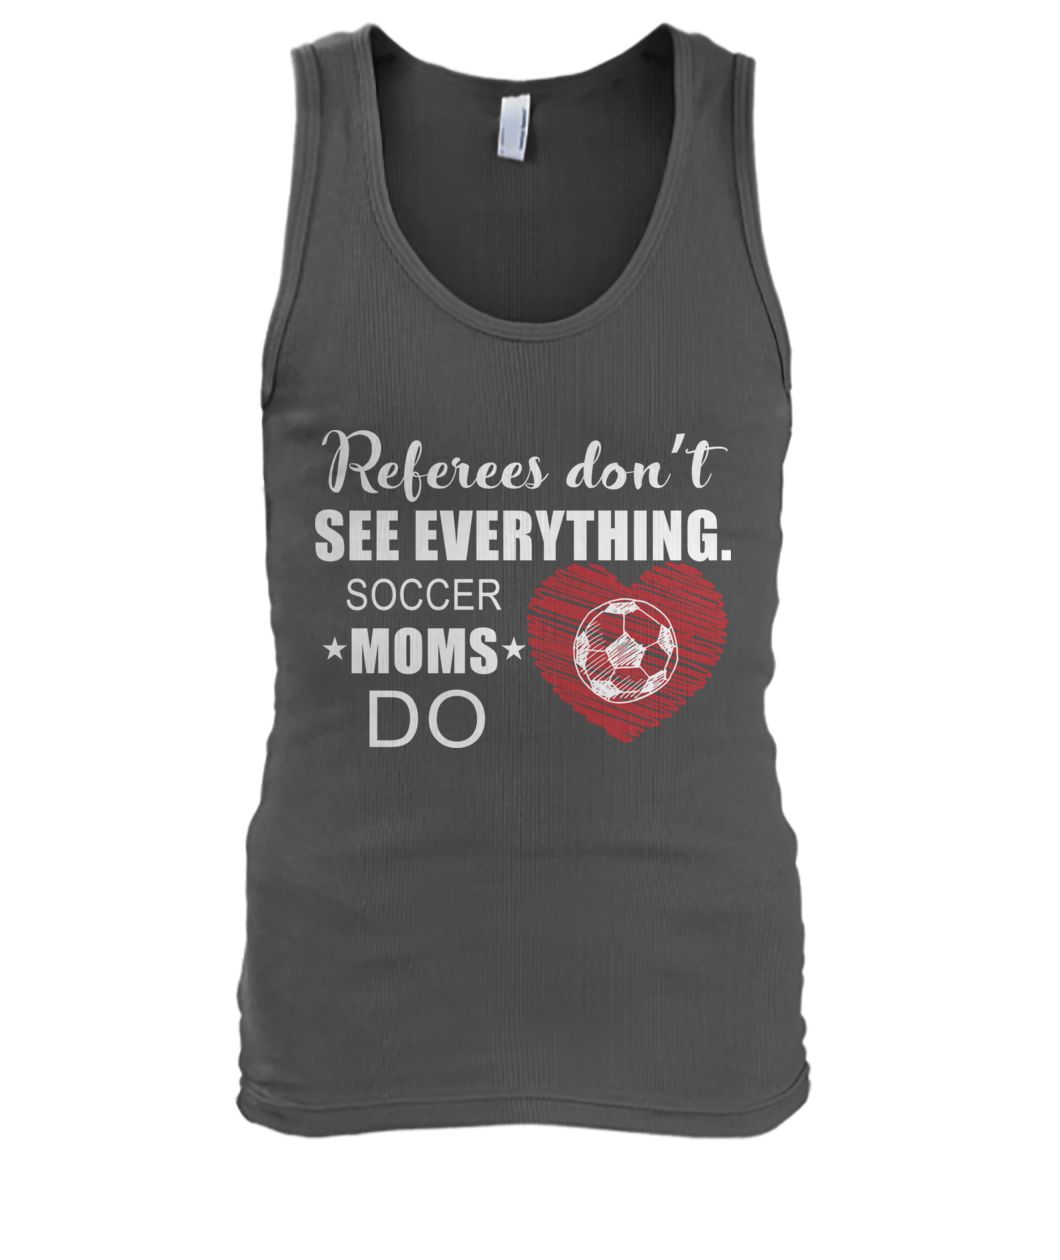 Referees don't see everything soccer moms do men's tank top